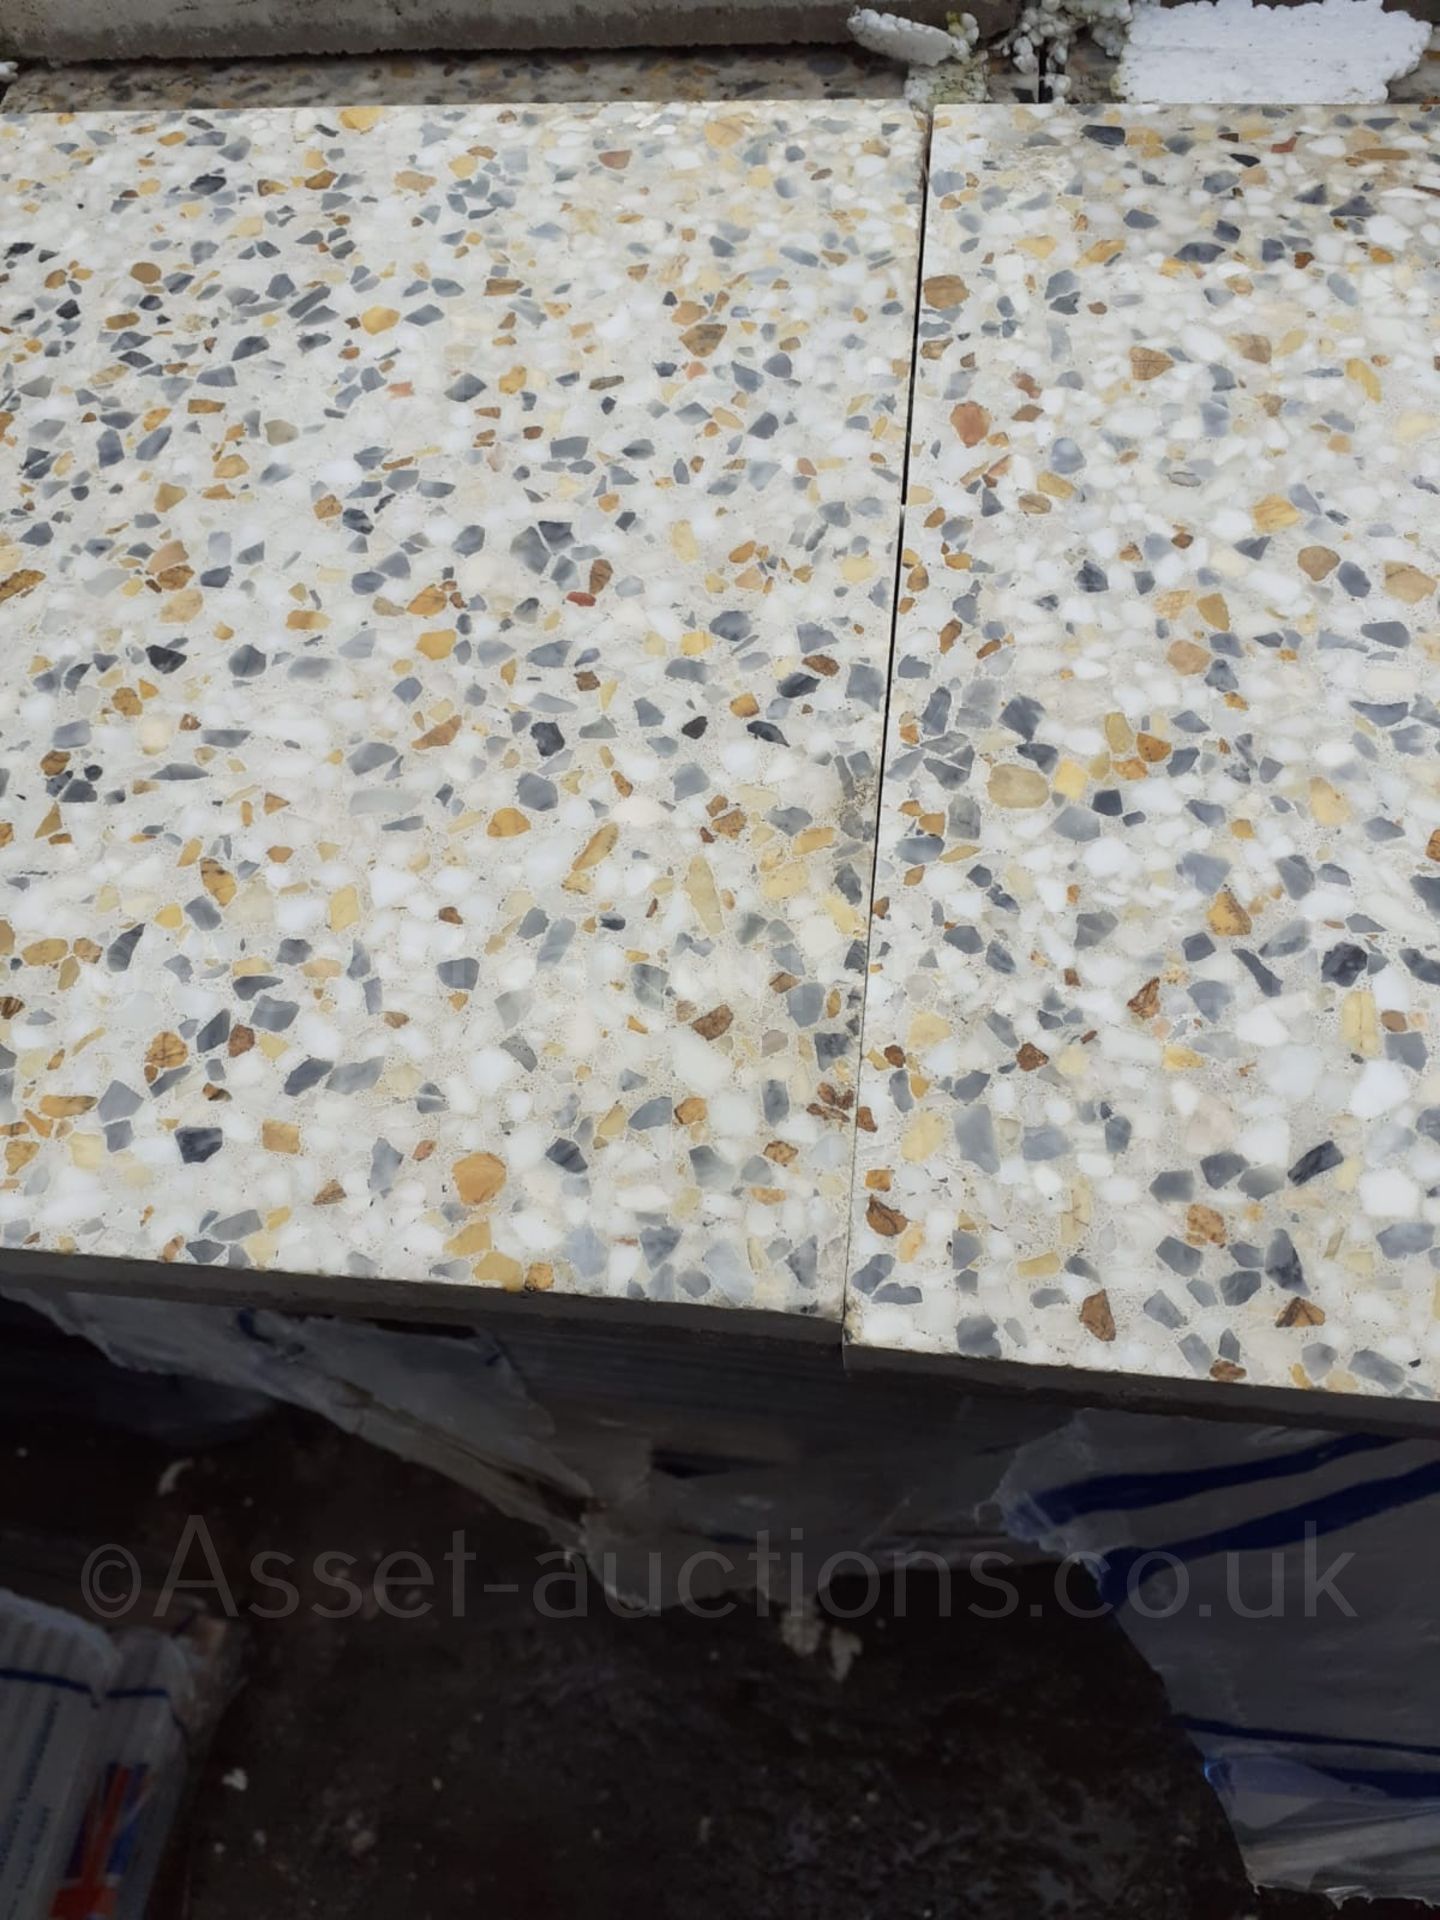 1 PALLET OF BRAND NEW TERRAZZO COMMERCIAL FLOOR TILES (TDE9), COVERS 24 SQUARE YARDS *PLUS VAT* - Image 2 of 6